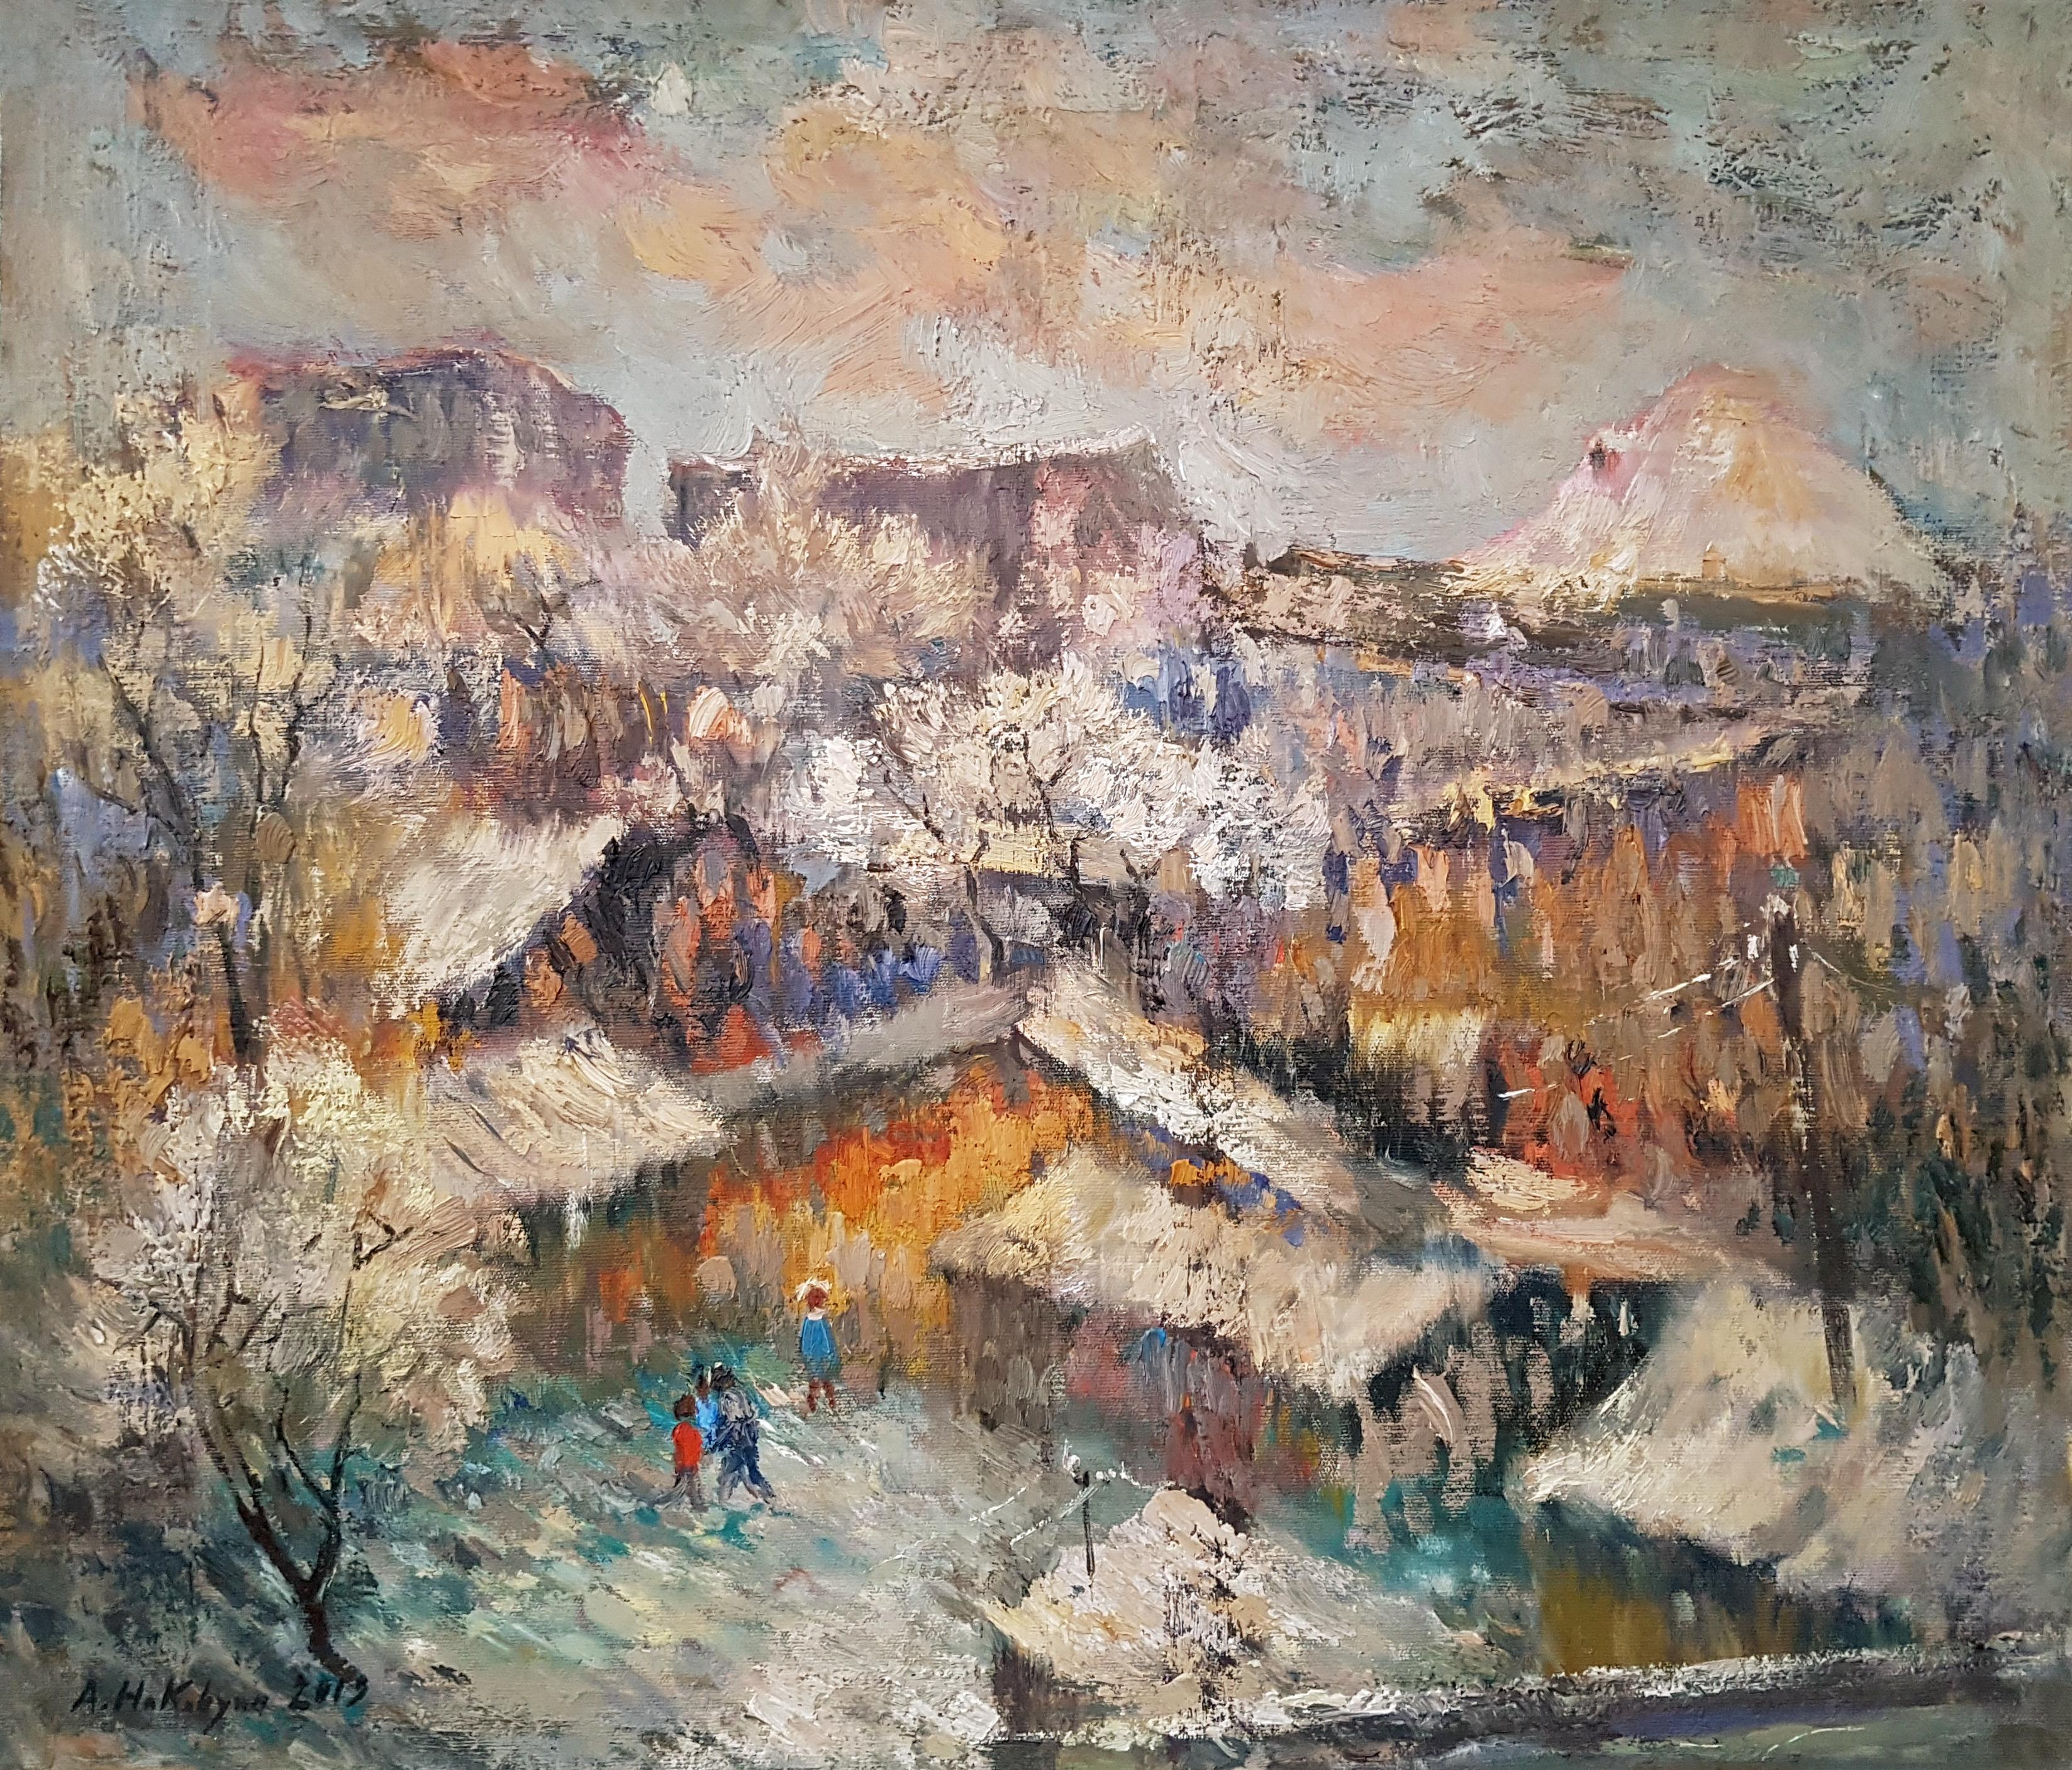 Winter Day in Old Yard, Original Oil Painting, One of a Kind